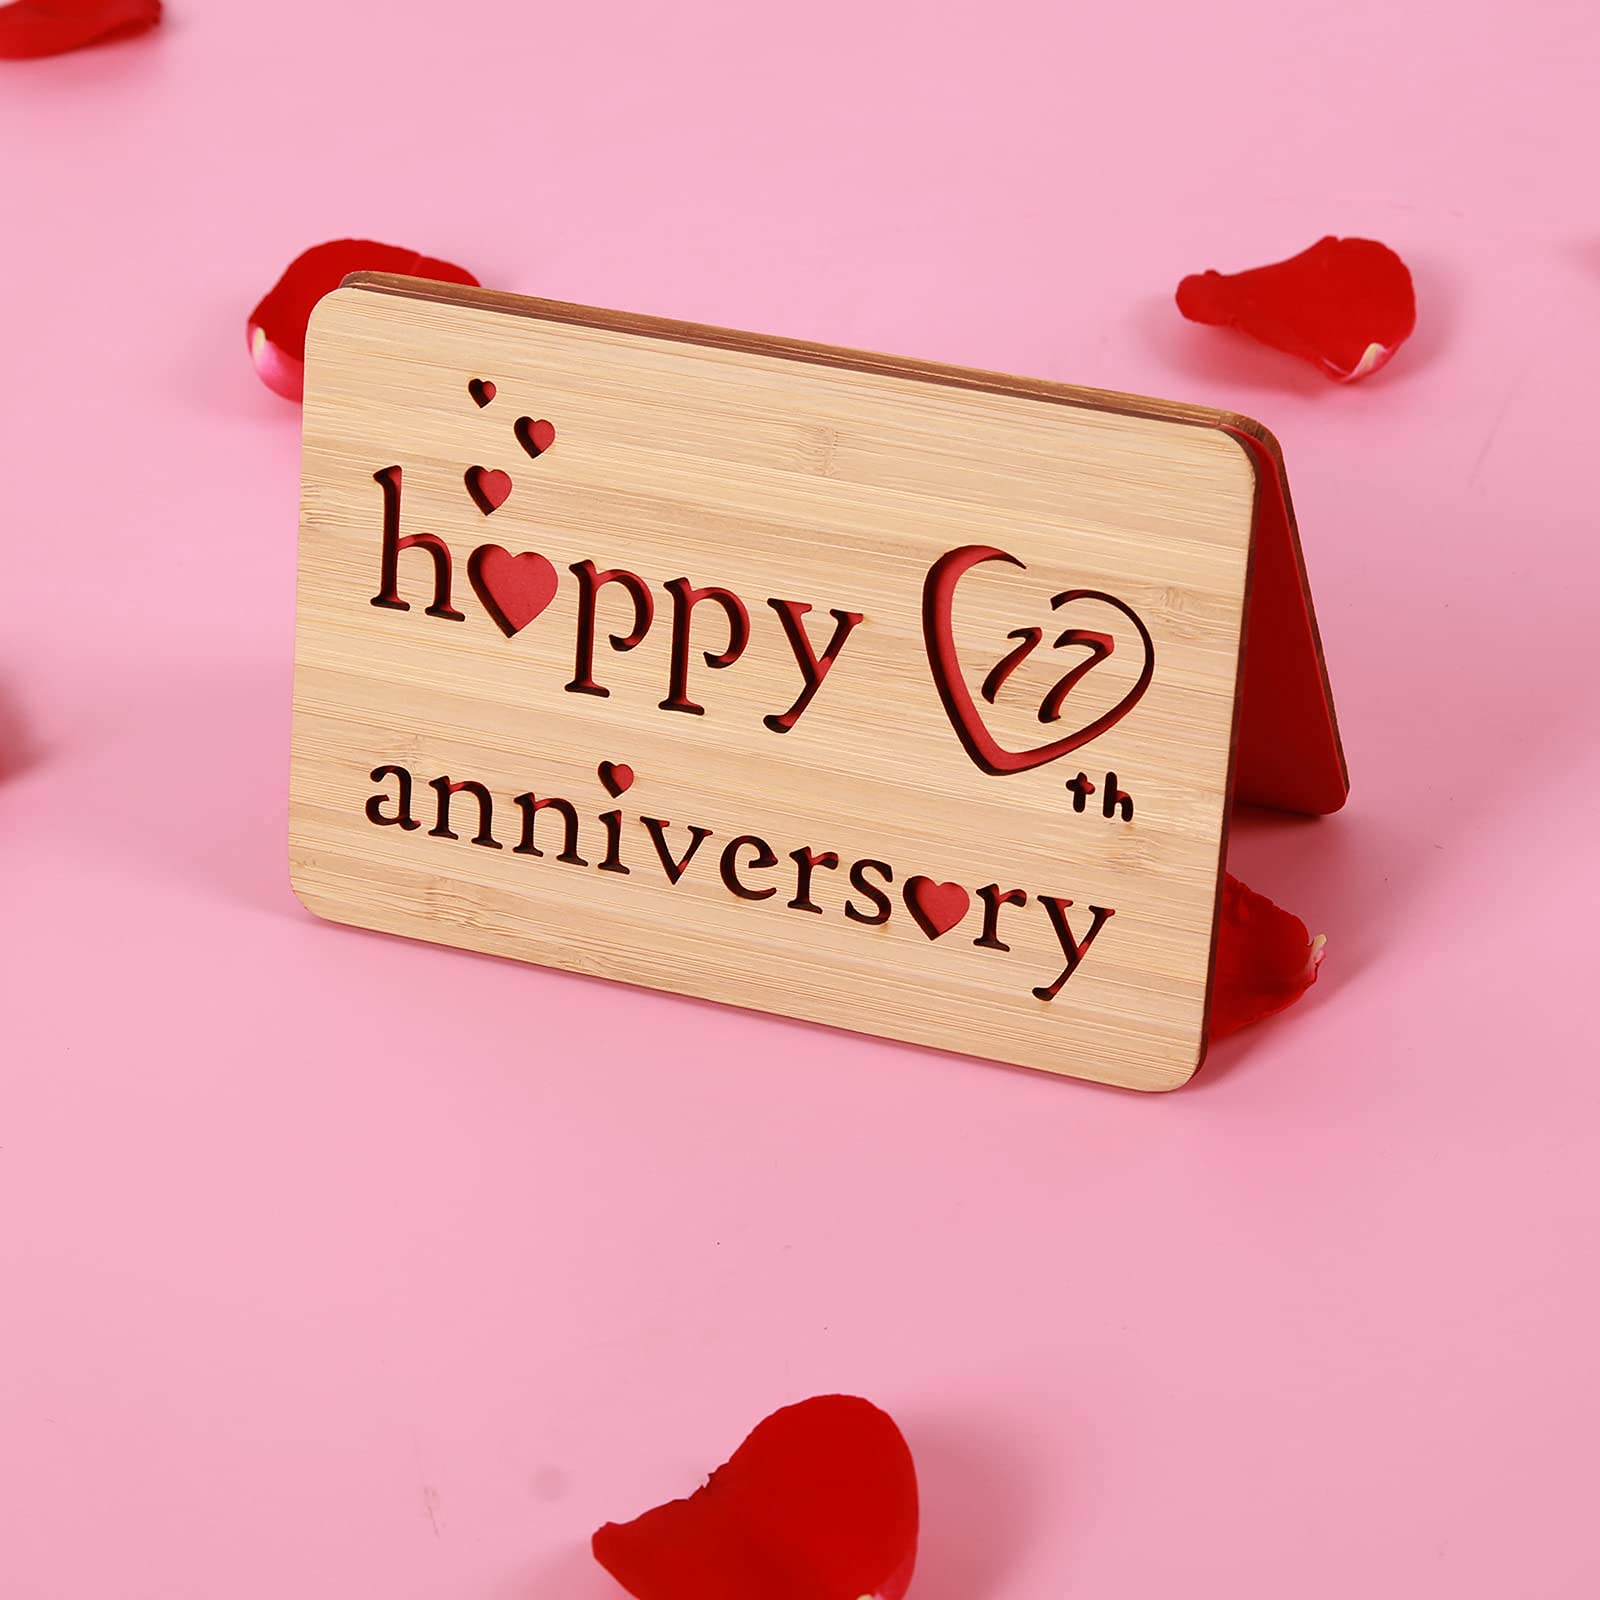 17th Happy Anniversary Cards, Handmade I Love You Greeting Card with Real Bamboo Wood,17 Years Valentines Day Gifts for Him or Her,17th Wedding Anniversary Card for Husband,Wife,Couple